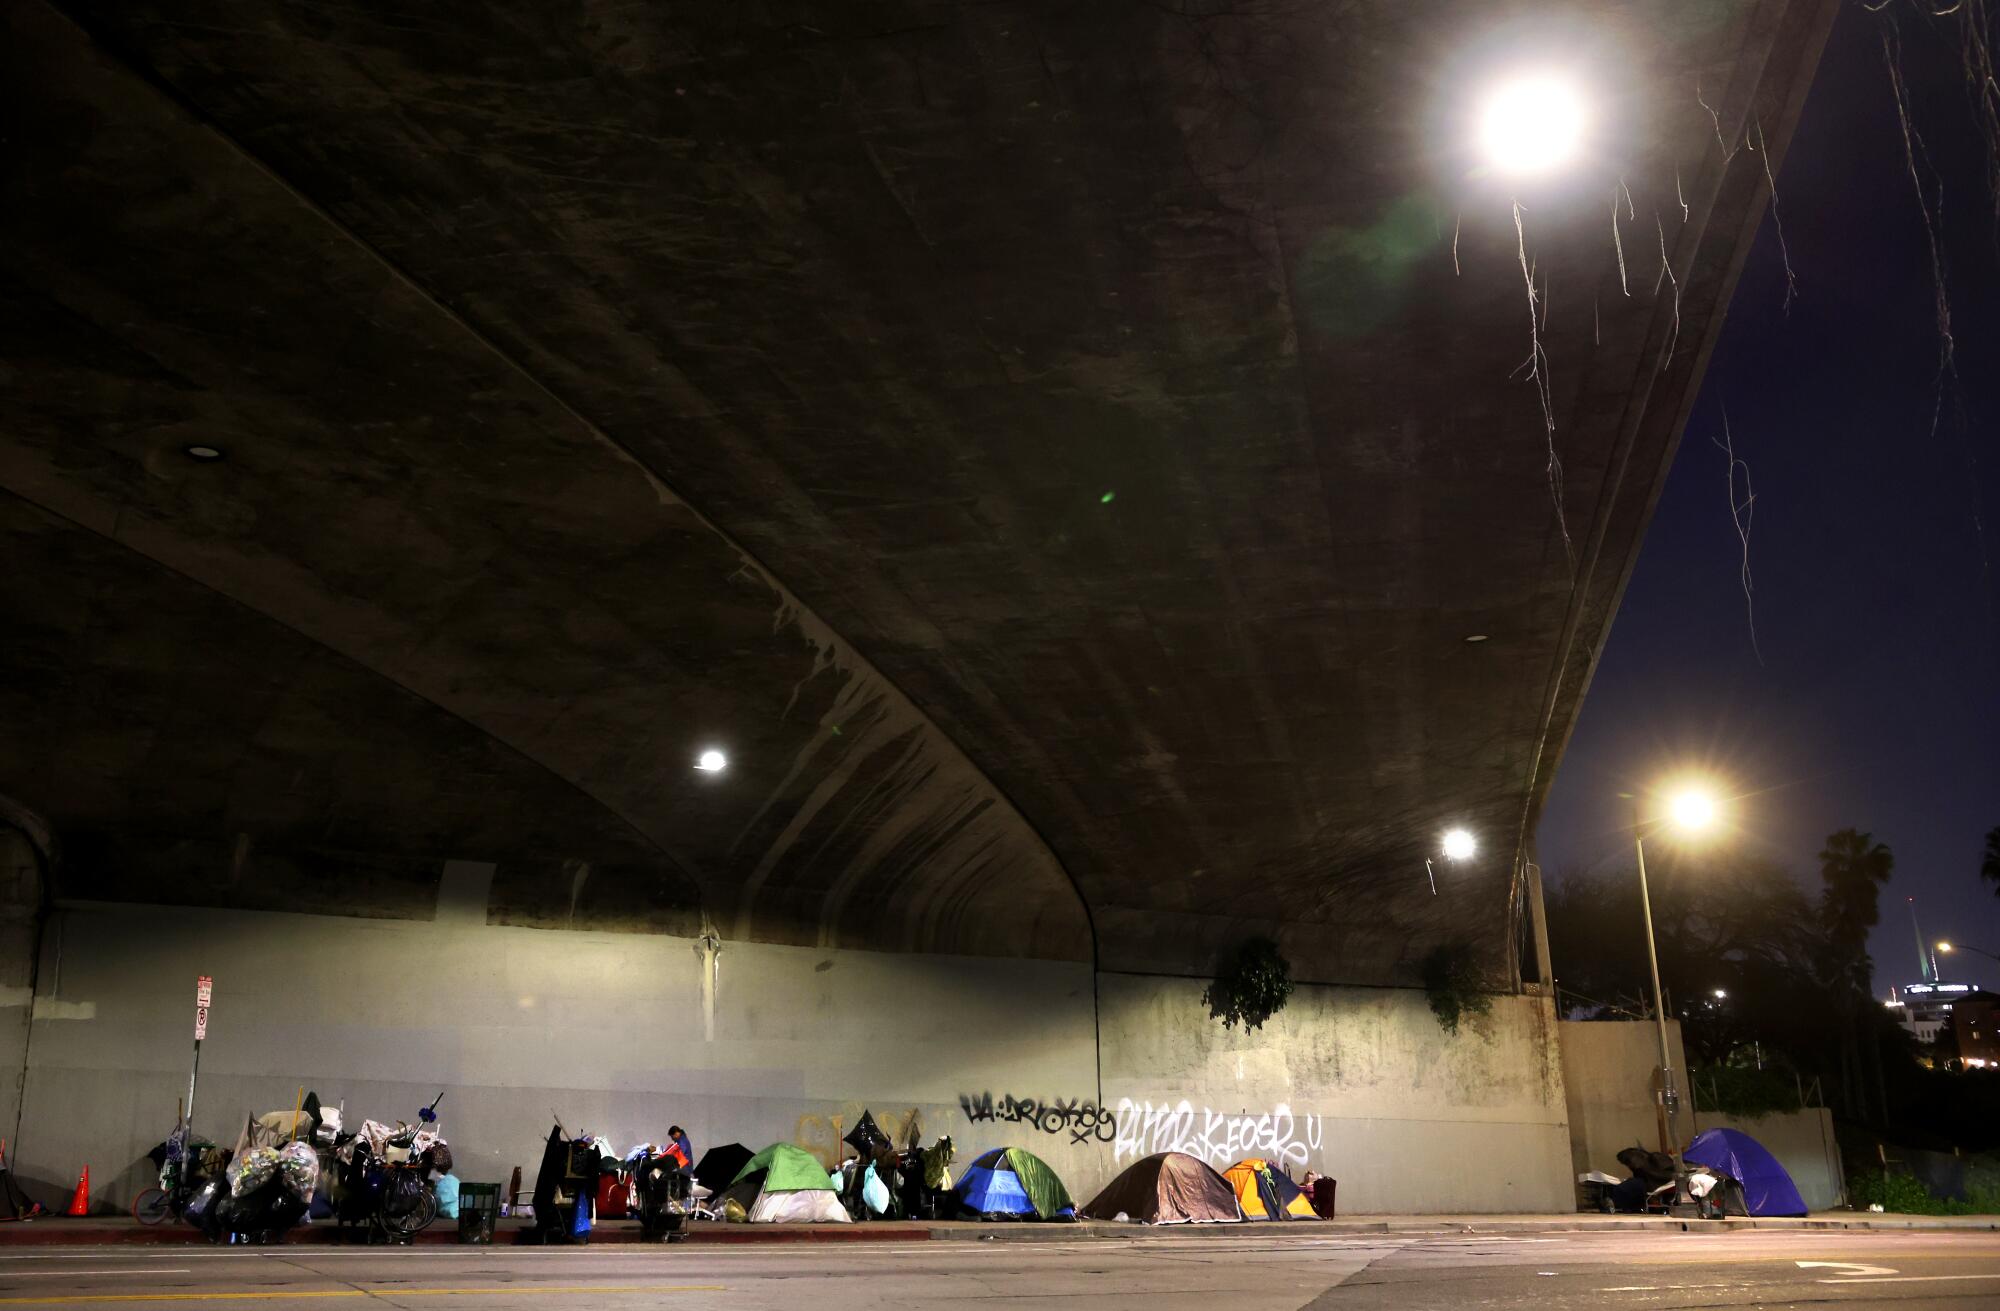 A homeless encampment under the 101 Freeway on Cahuenga Boulevard in Hollywood.